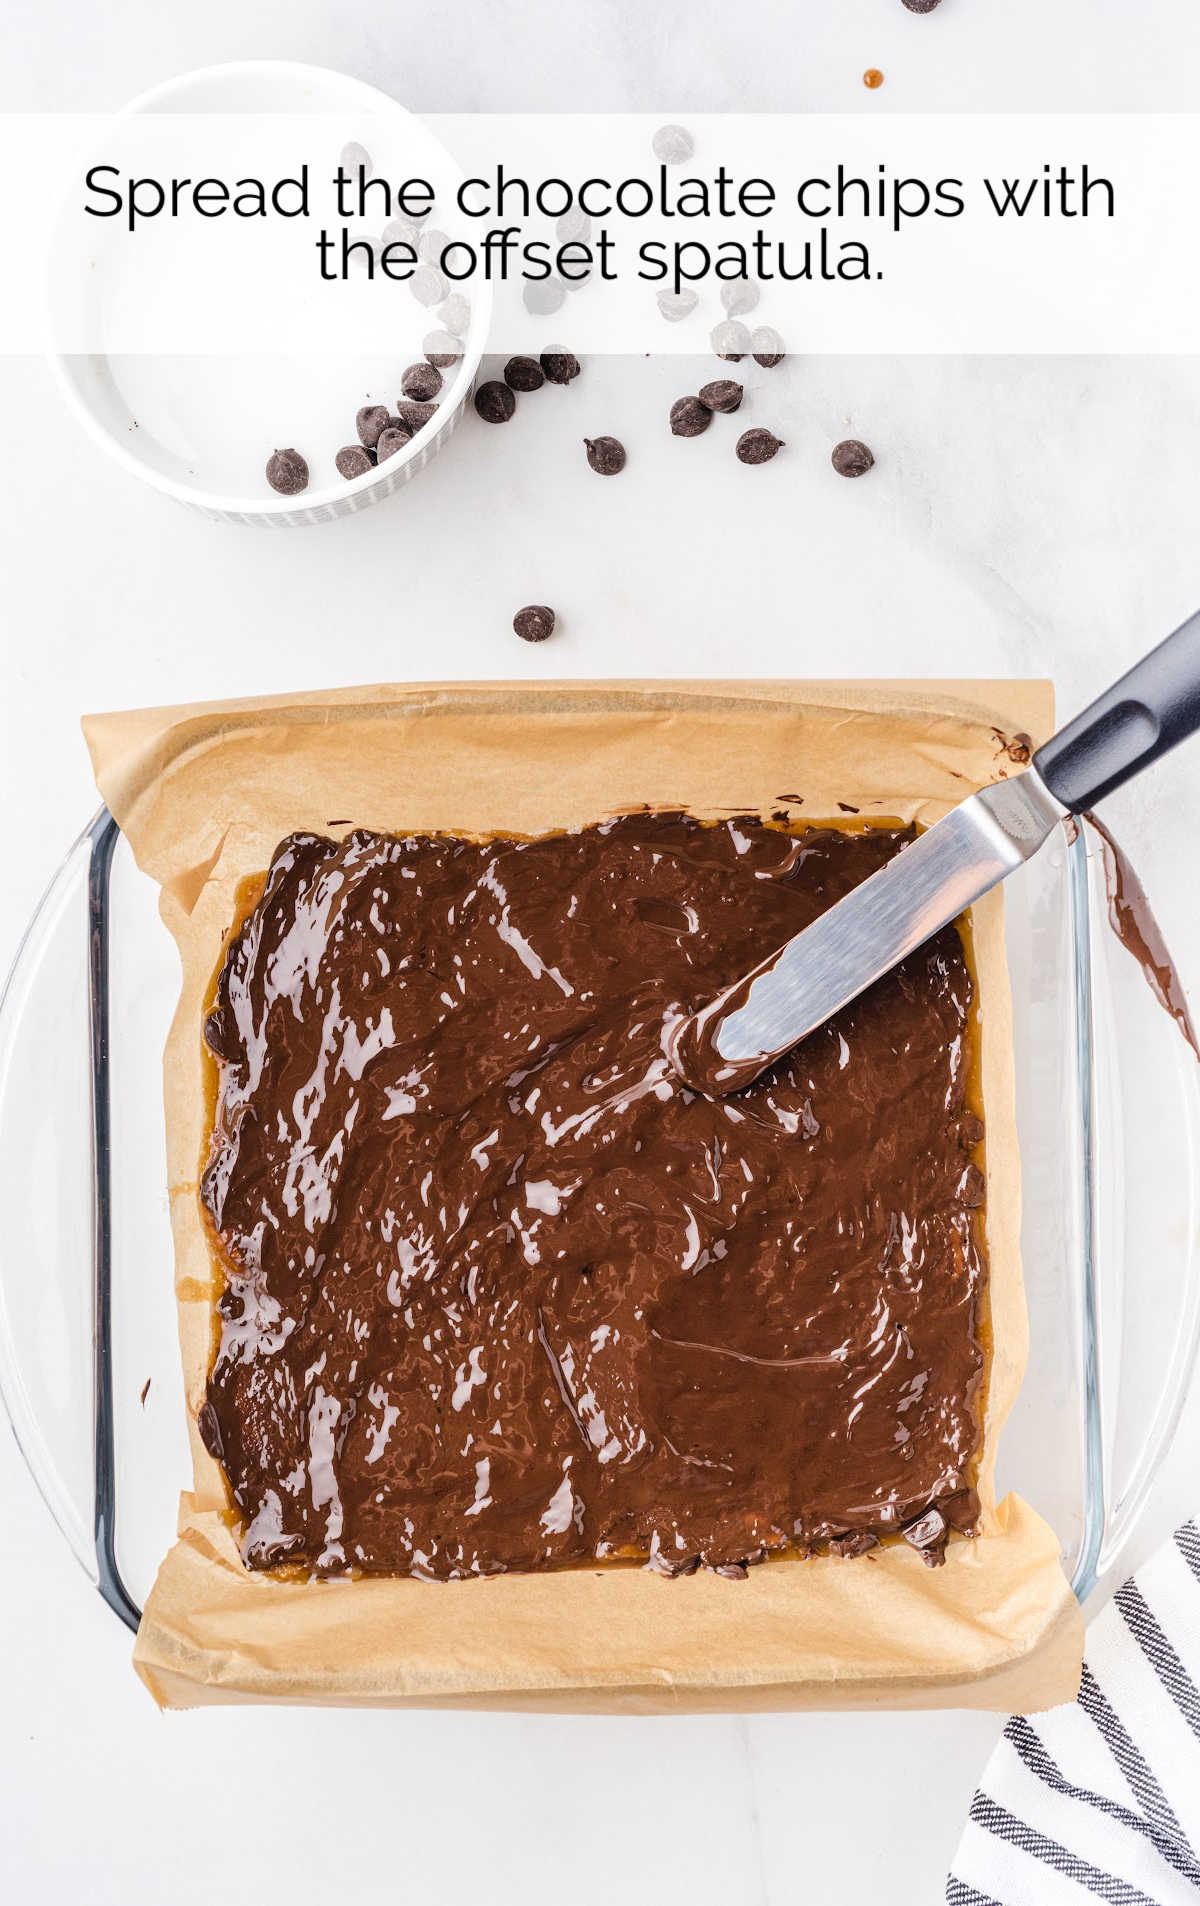 melted chocolate chips spread on top of the caramel sauce layer with a spatula